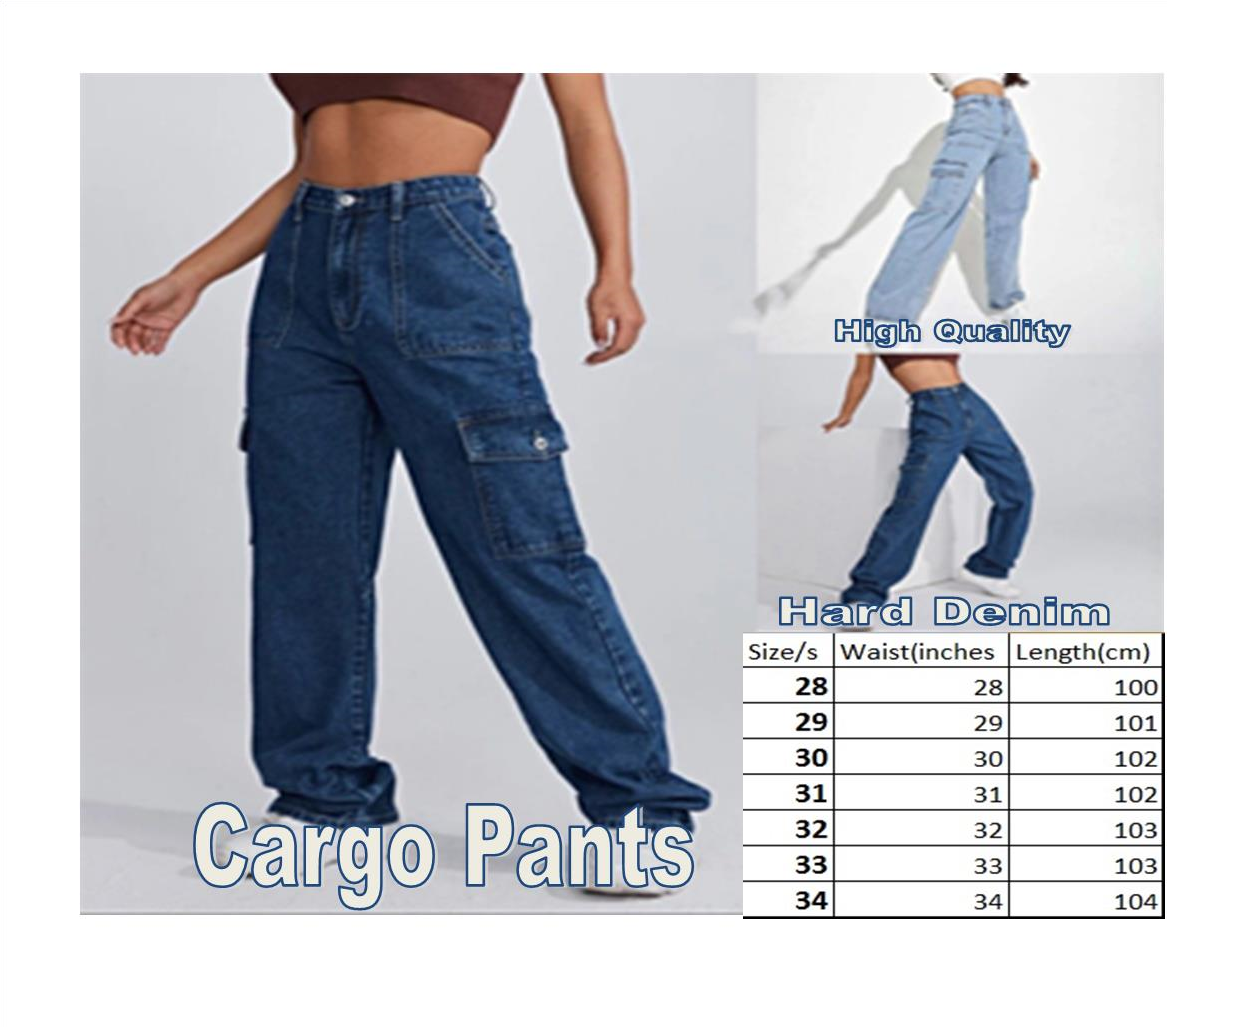 Straight Cut/Wide Leg Pants 6 Pocket Cargo Pants good for Daily